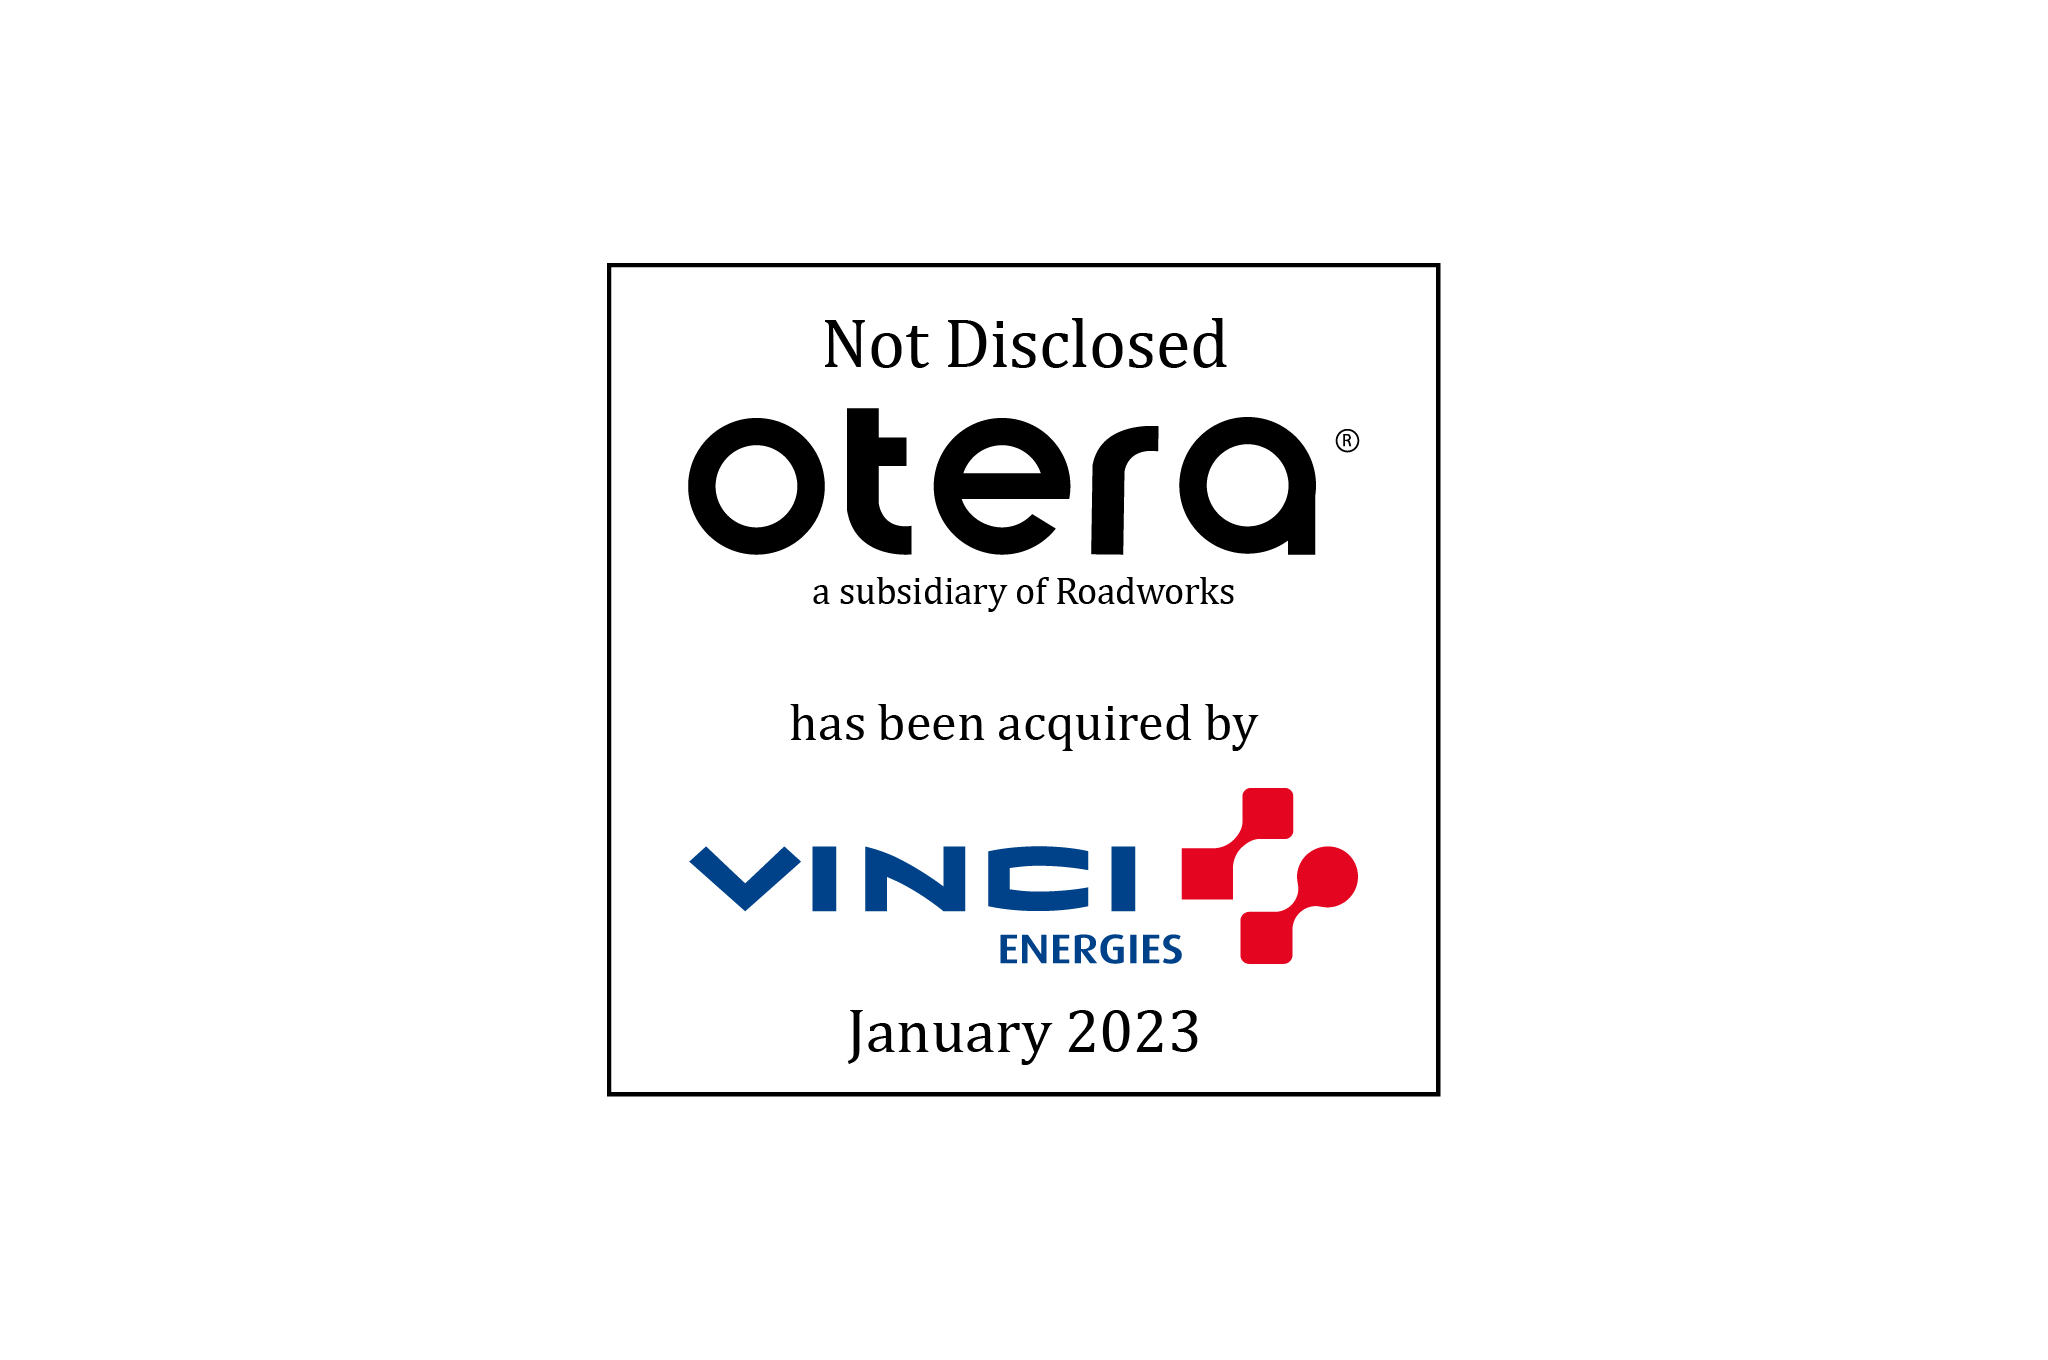 Not Disclosed | Otera (logo) a subsidiary of Roadworks, has been acquired by Vinci Energies (logo) | January 2023